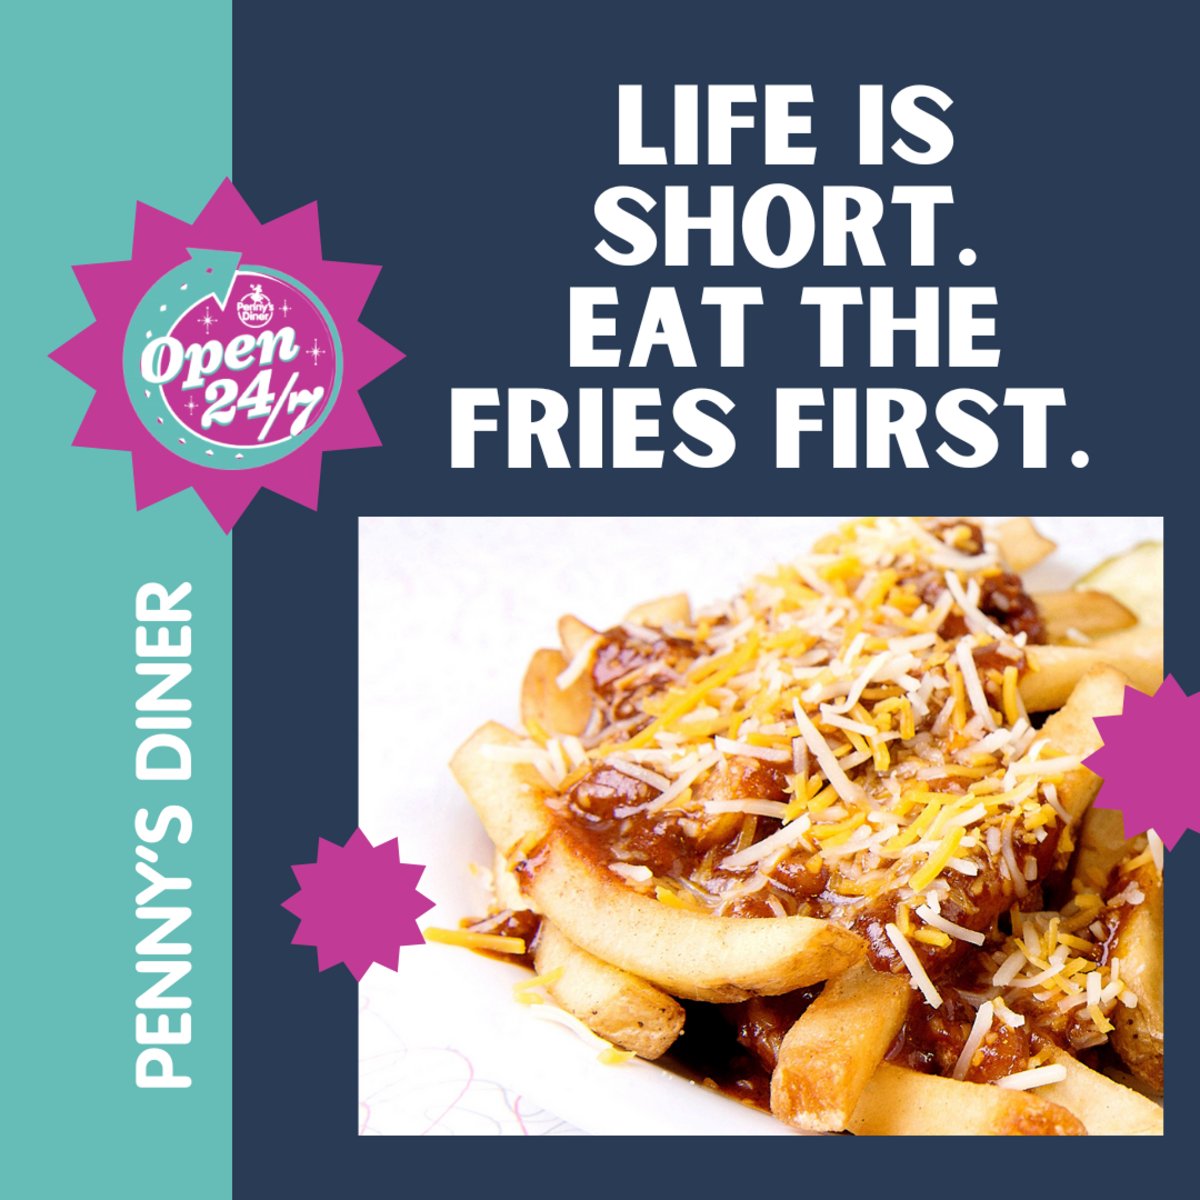 Like we always say at Penny's Diner Missouri Valley, chili cheese the day! Stop by and kick off your feast with a basket of our legendary #chilicheesefries. Get 'em while they're hot!🔥🍟 #PennysDiner